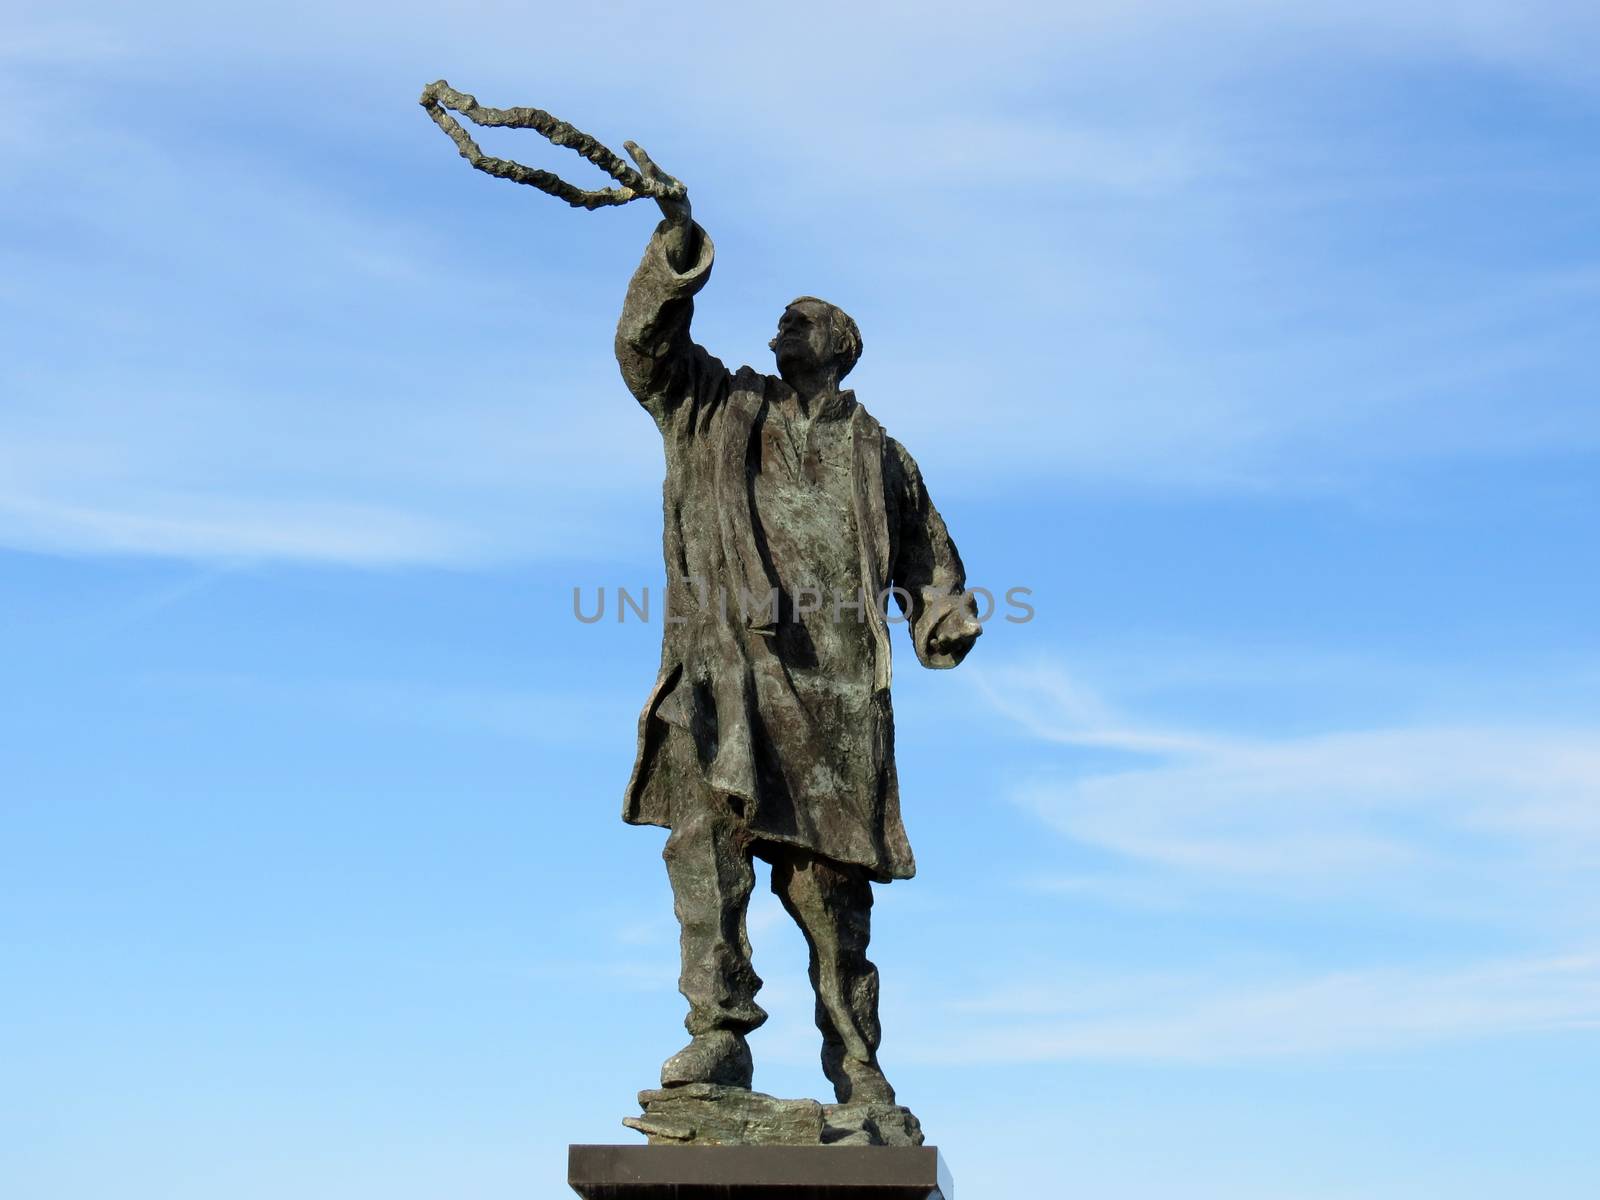 Statue of Late Rajiv Gandhi (Youngest Indian Prime Minister from 1984 to 1989) at water sports complex, Port Blair, Andaman and Nicobar Islands, India.